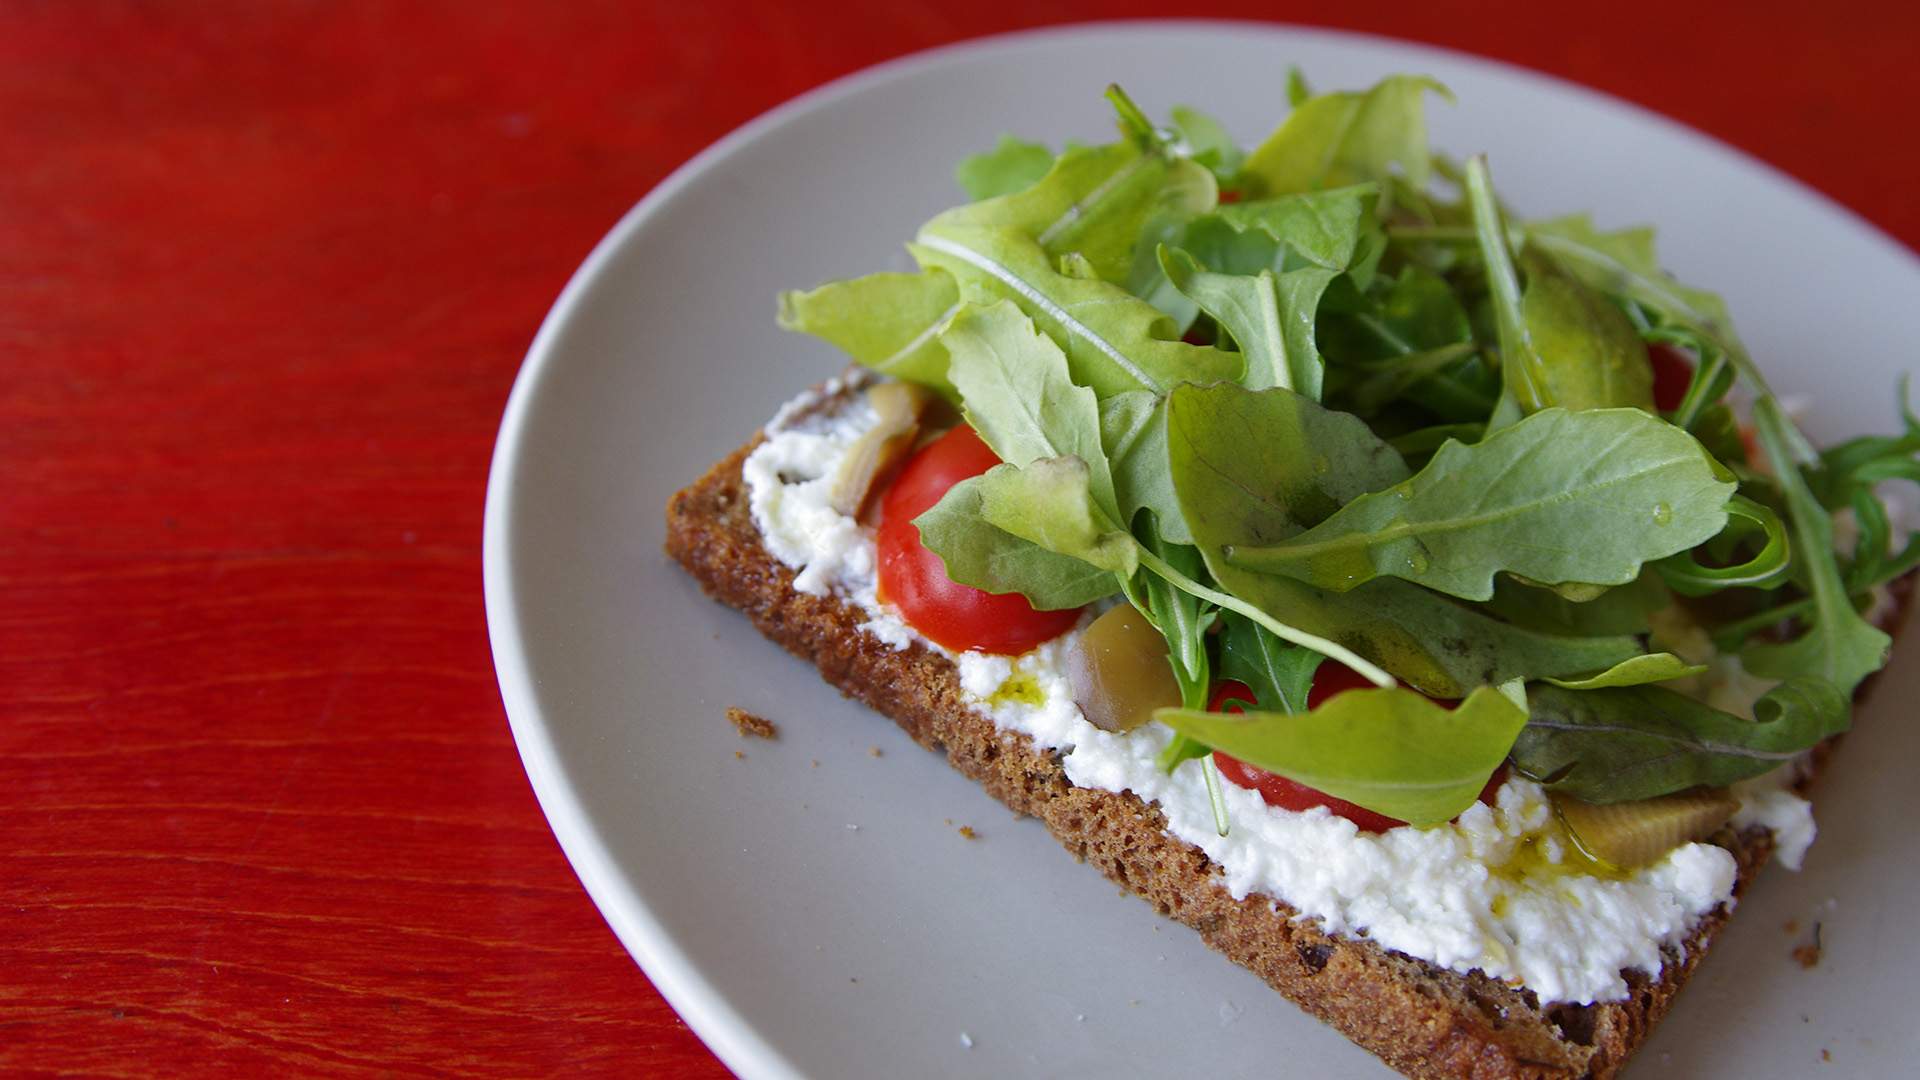 A Dedicated Cream Cheese Cafe Is Opening in New York